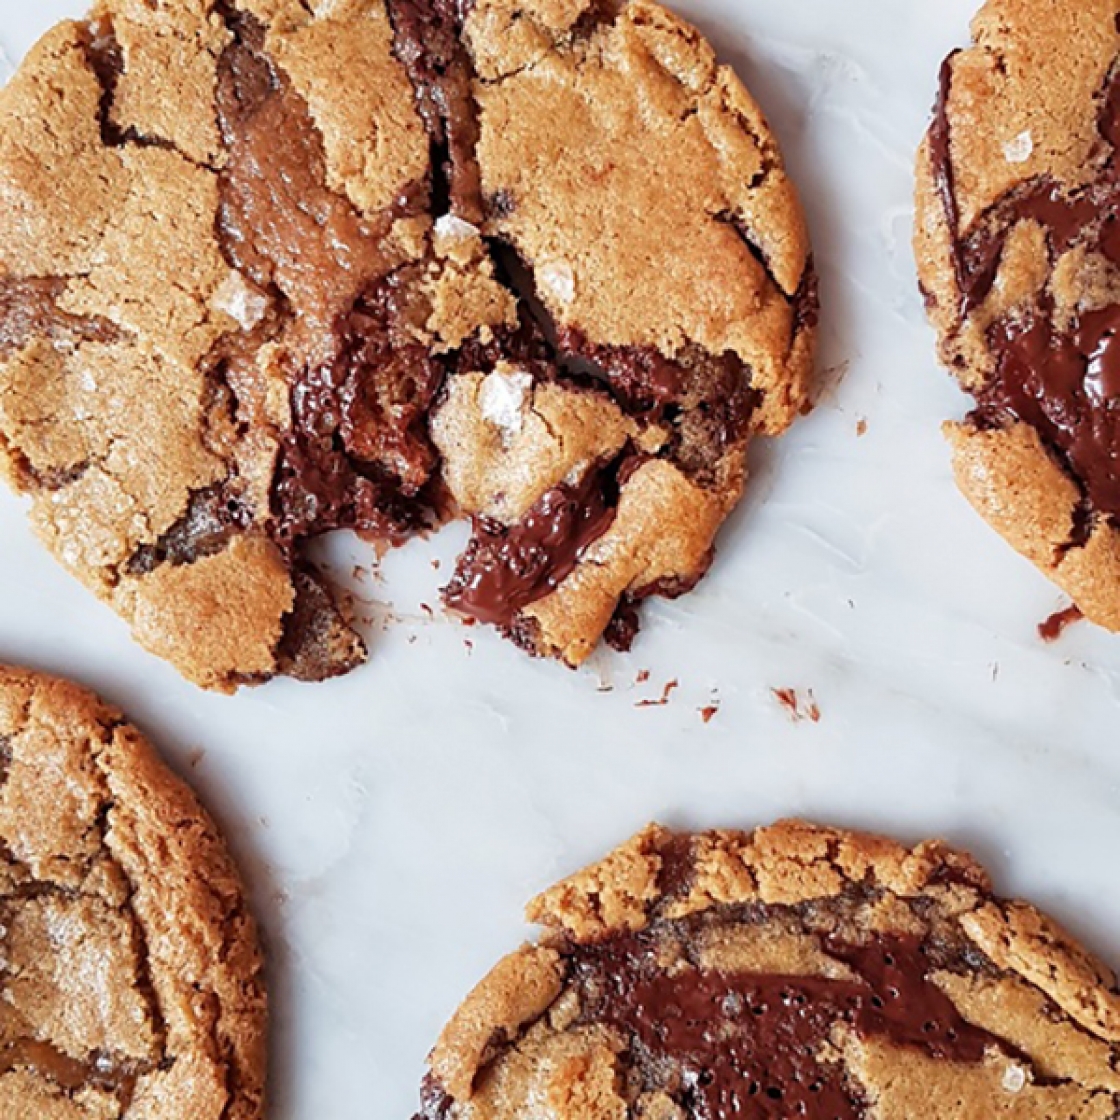 9 DIY baking kits for delicious treats that require little effort